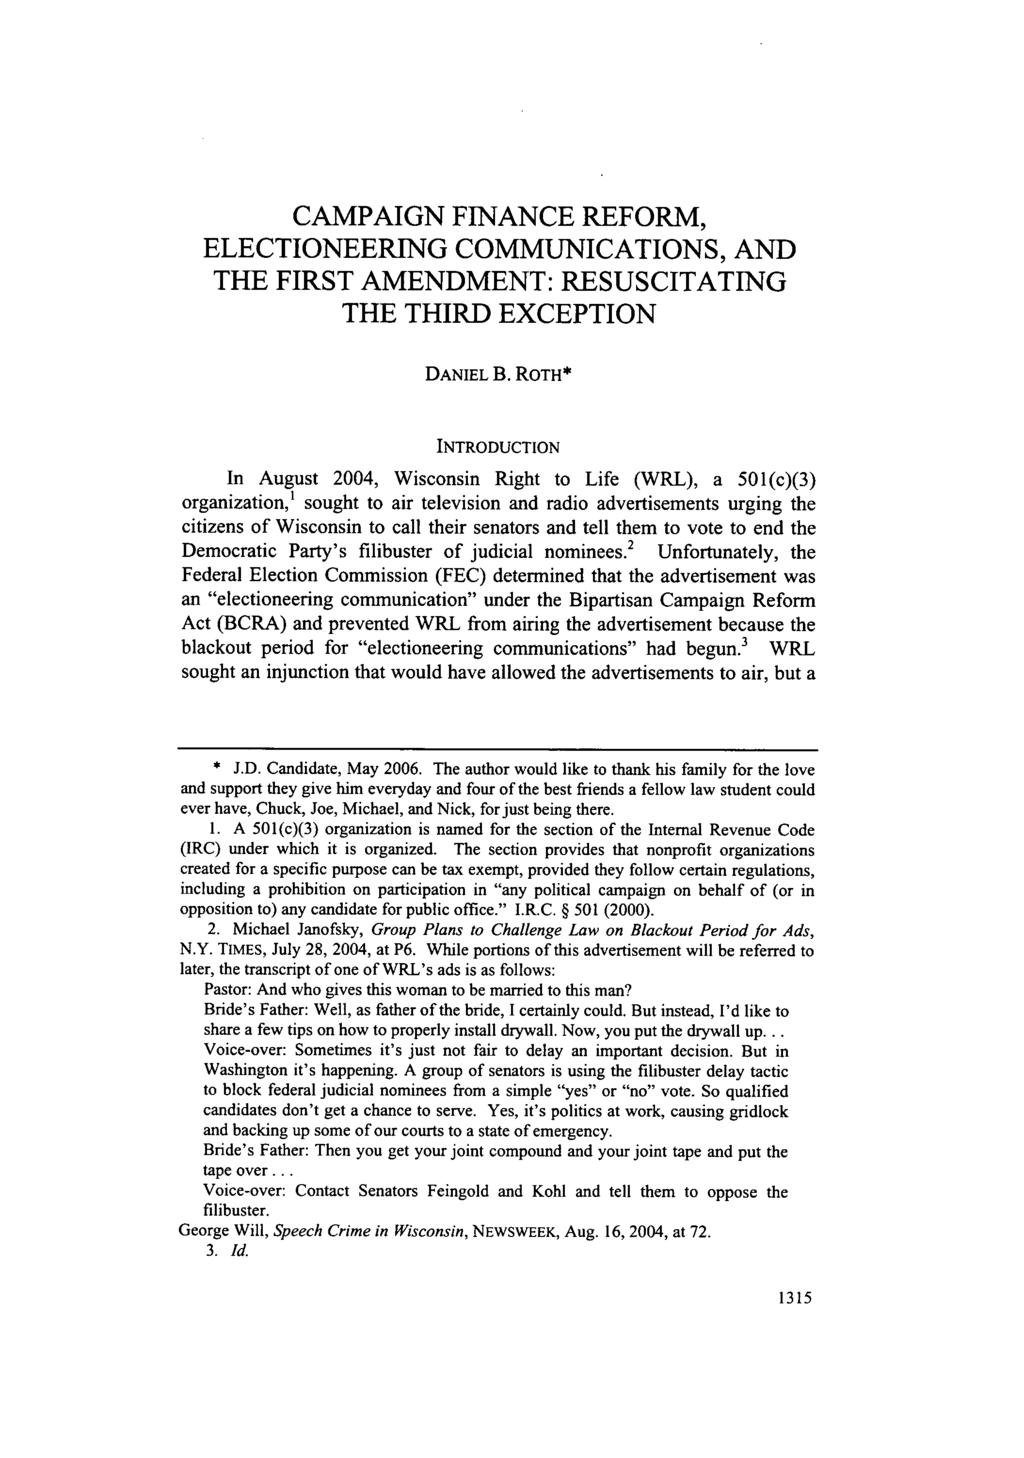 CAMPAIGN FINANCE REFORM, ELECTIONEERING COMMUNICATIONS, AND THE FIRST AMENDMENT: RESUSCITATING THE THIRD EXCEPTION DANIEL B.